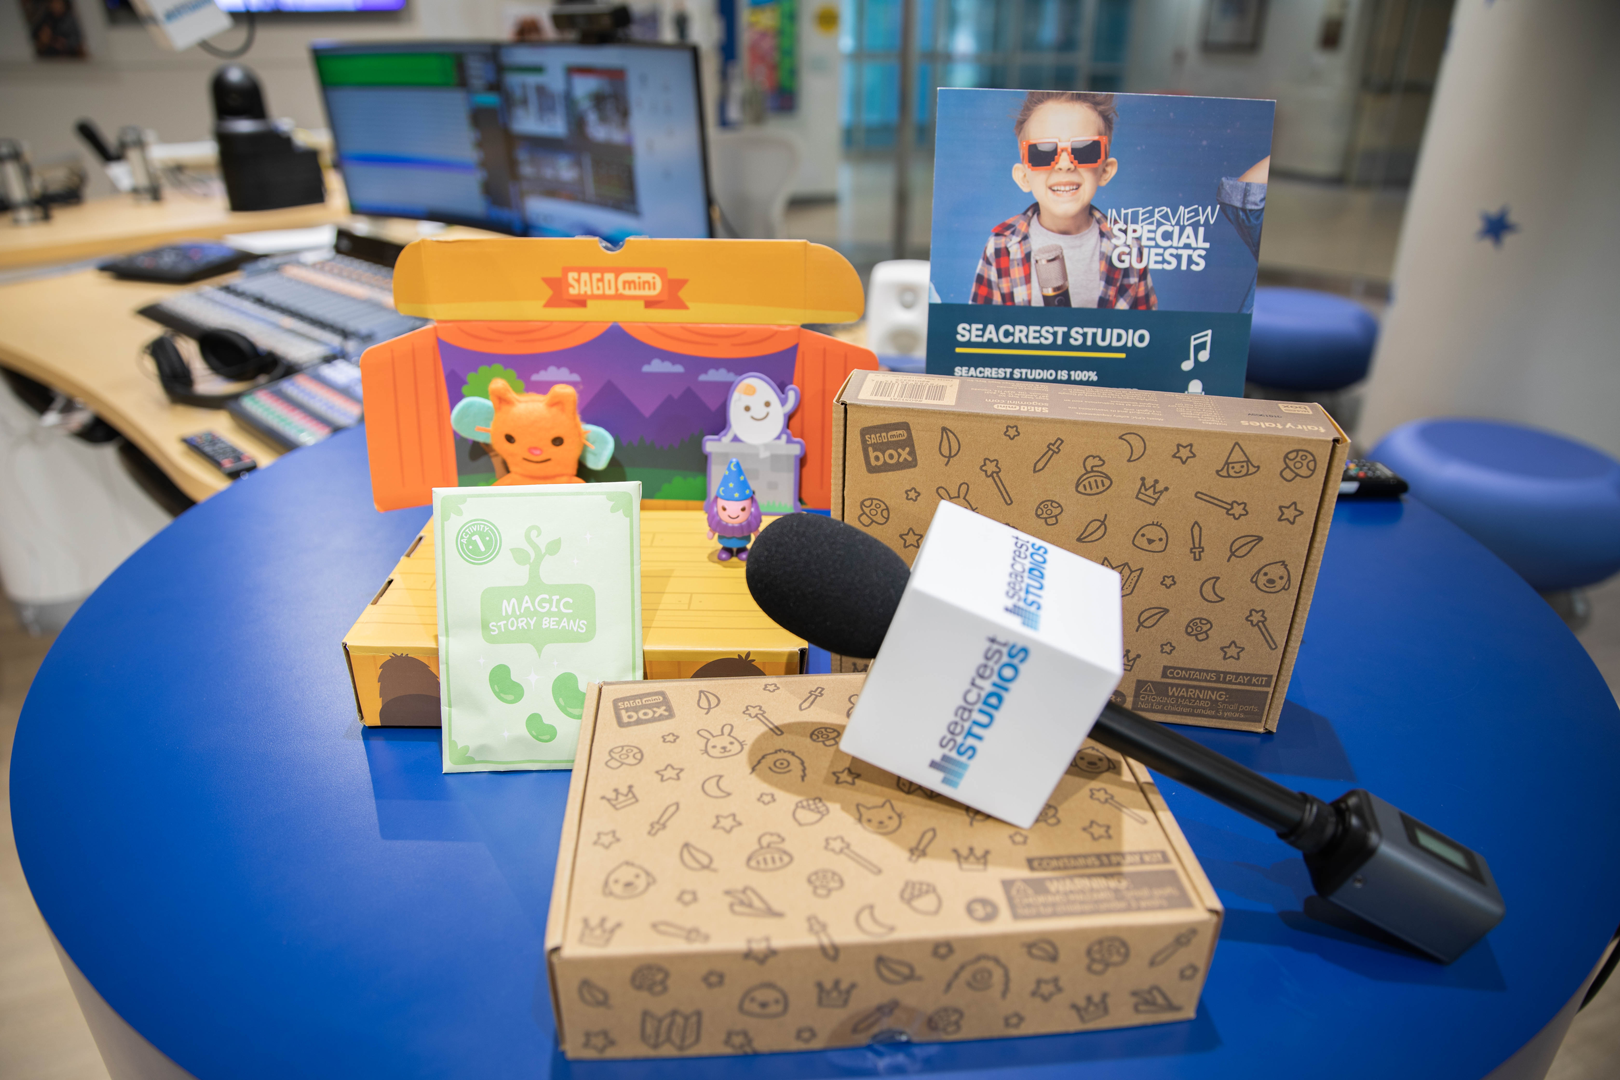 A virtual playdate with the Ryan Seacrest Foundation and Sago Mini Box